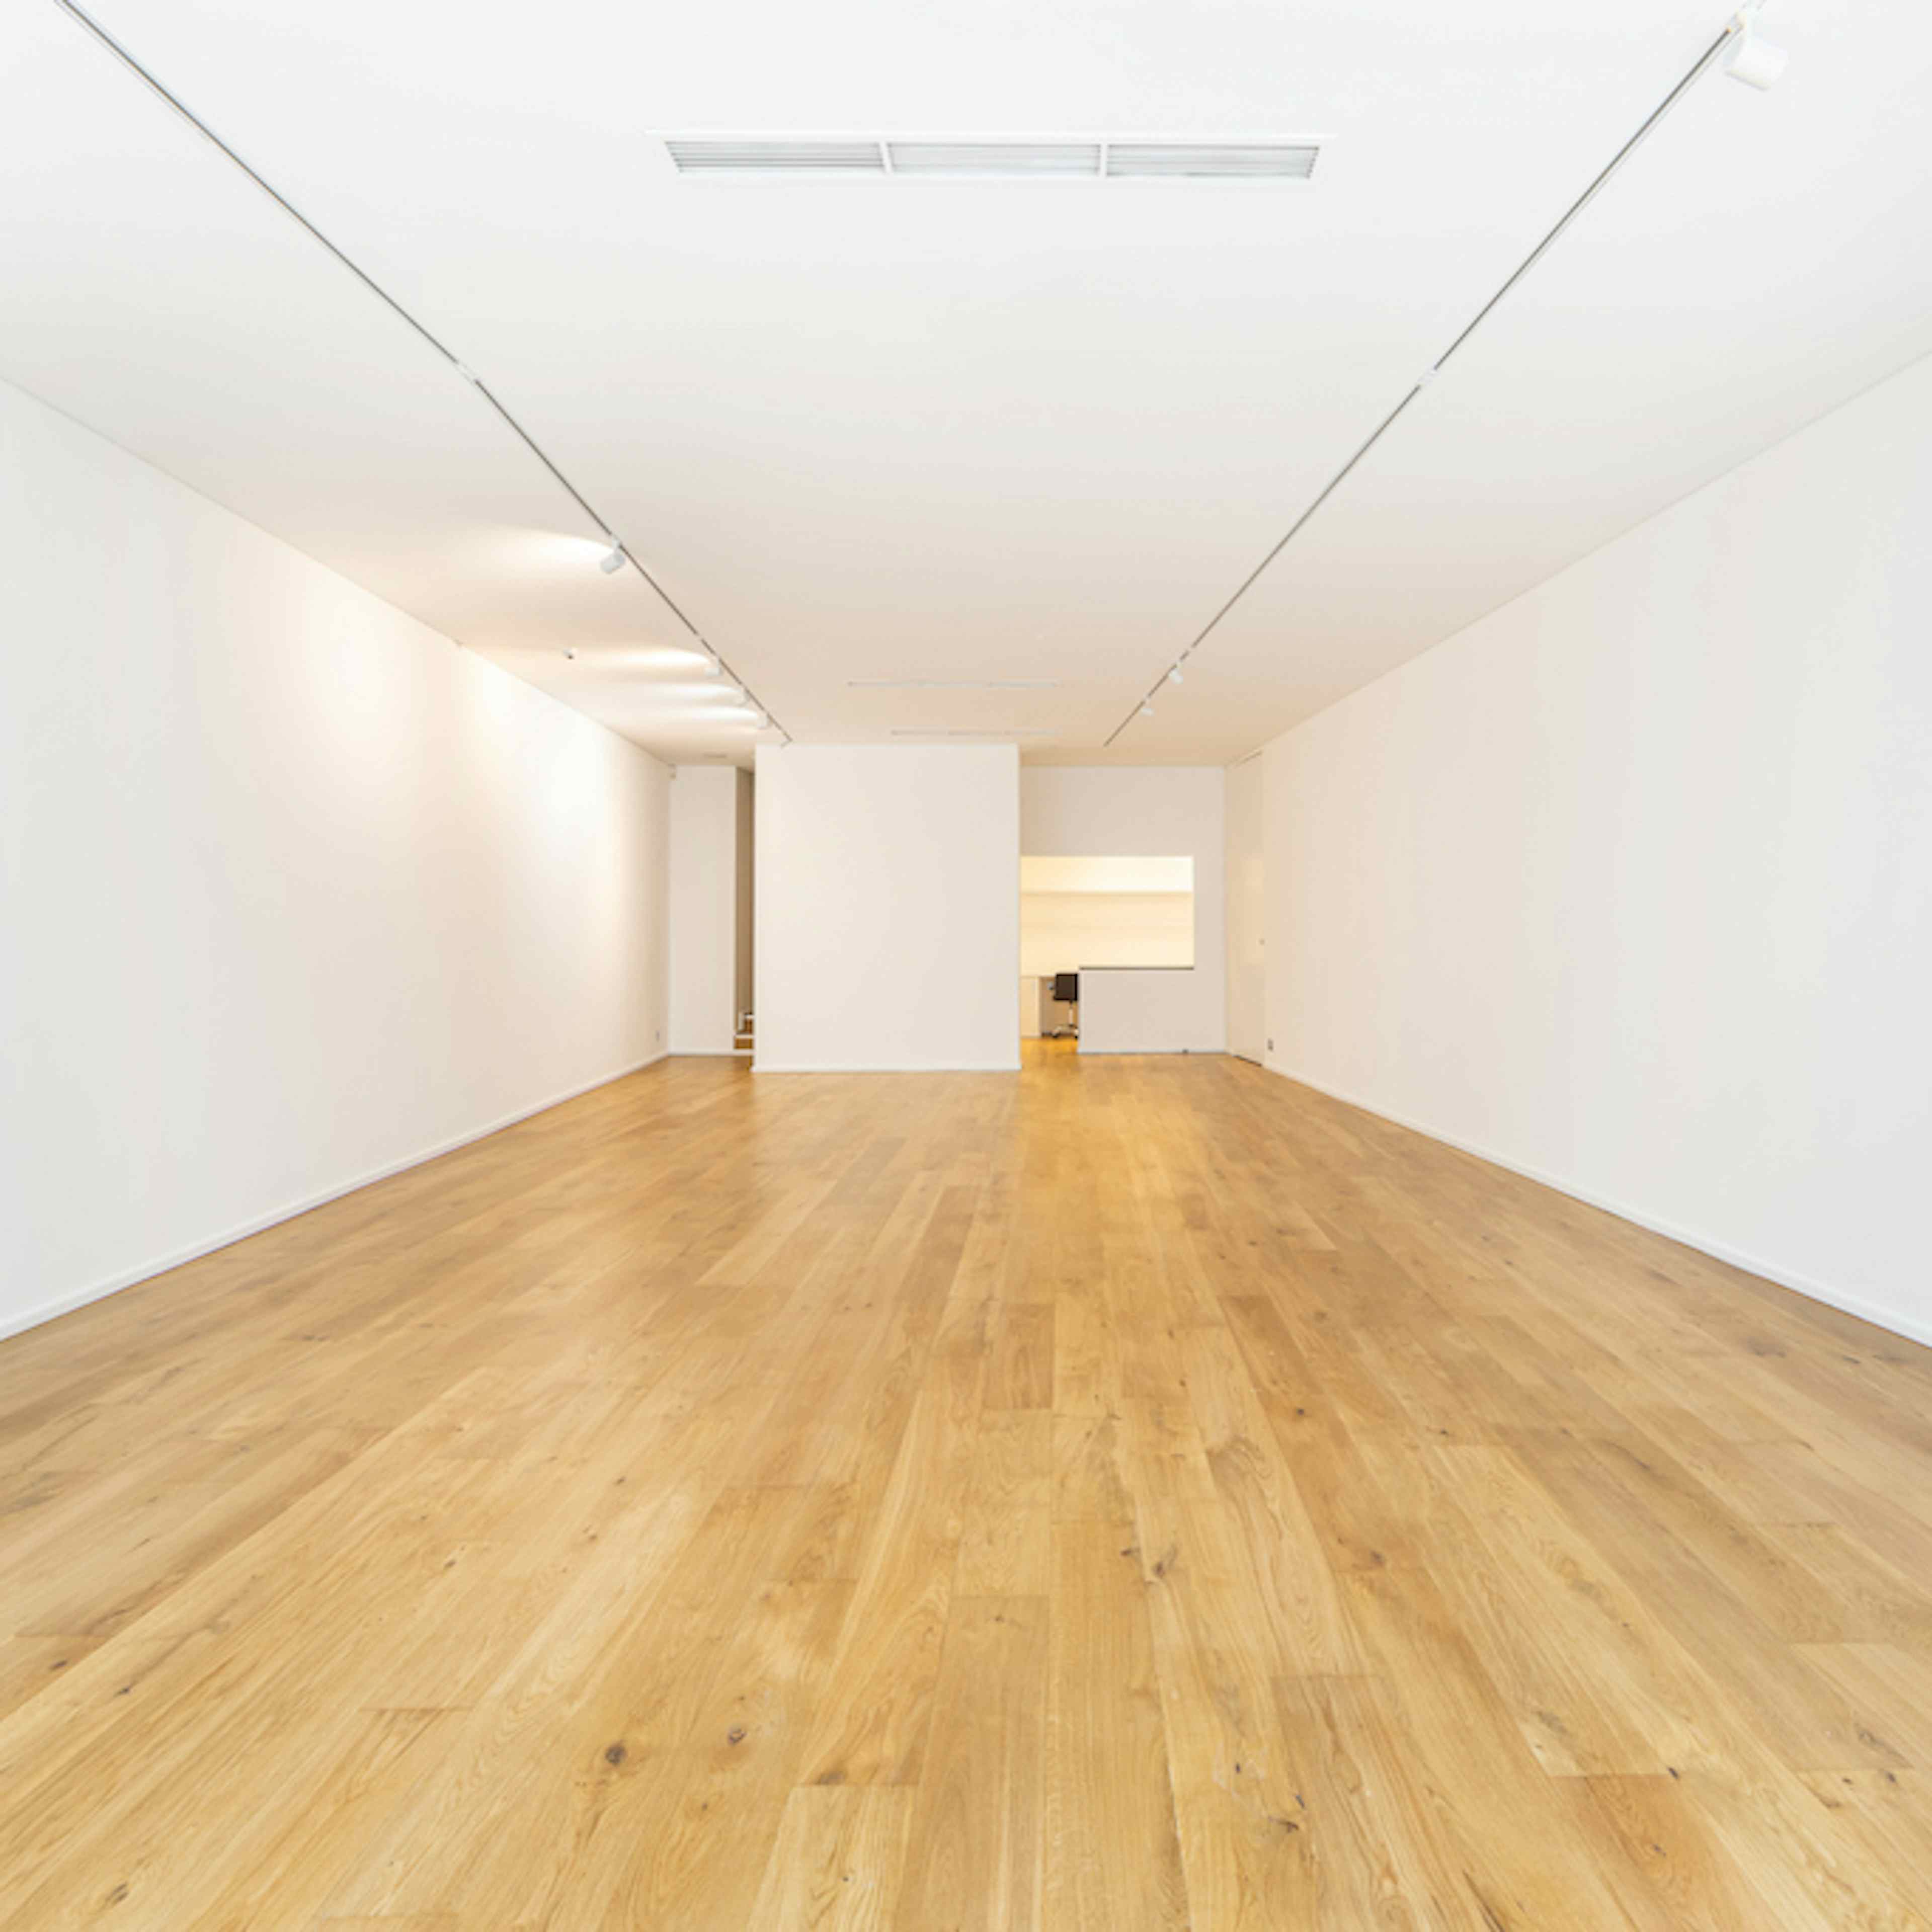 Mayfair Gallery - Whole Venue image 1